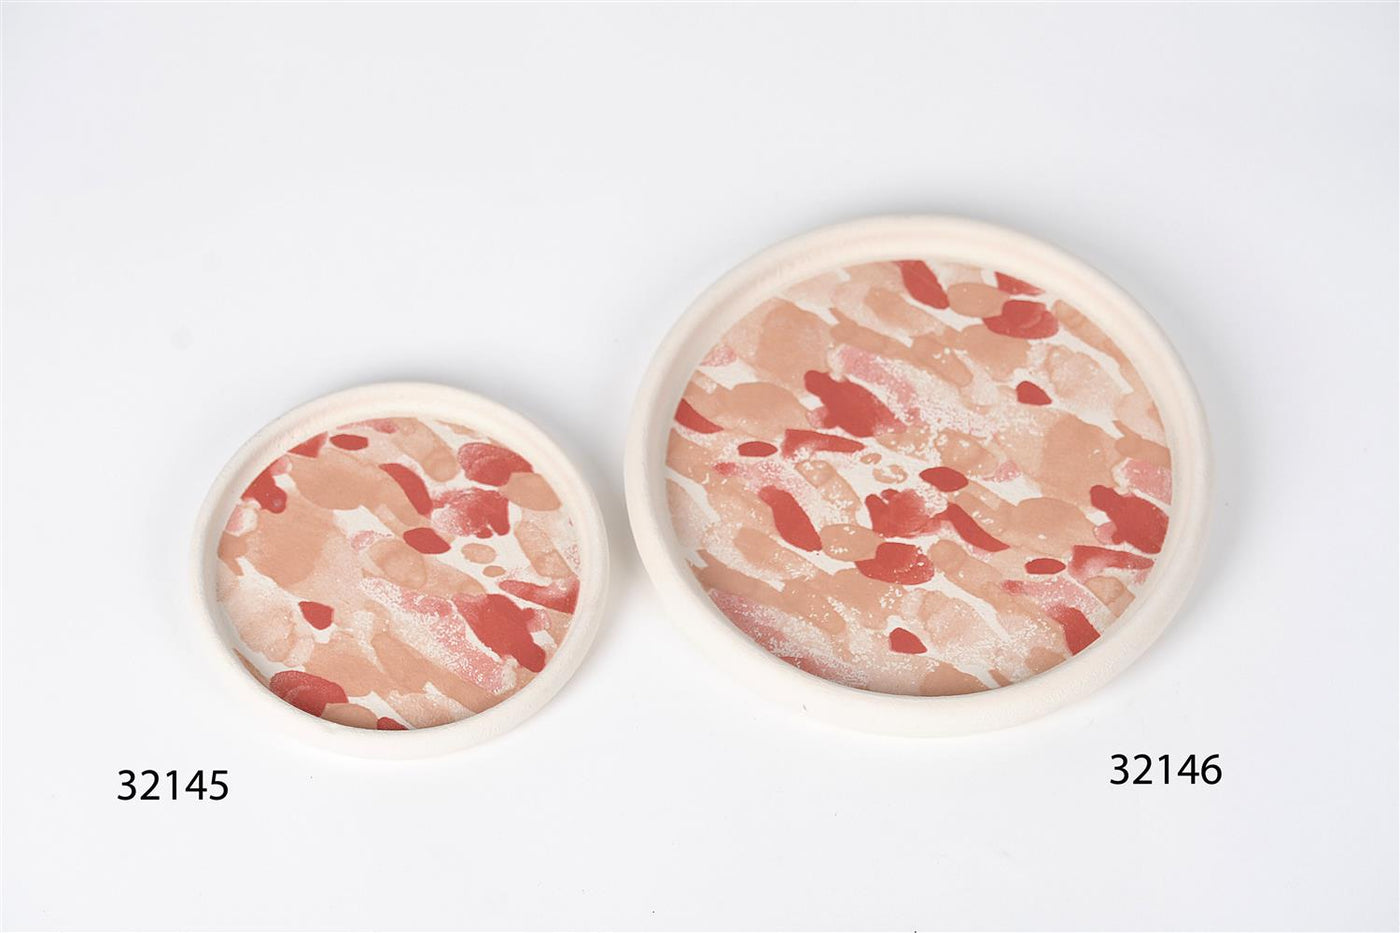 Patchy Paint Teaberry Ice - Round Tray - Large